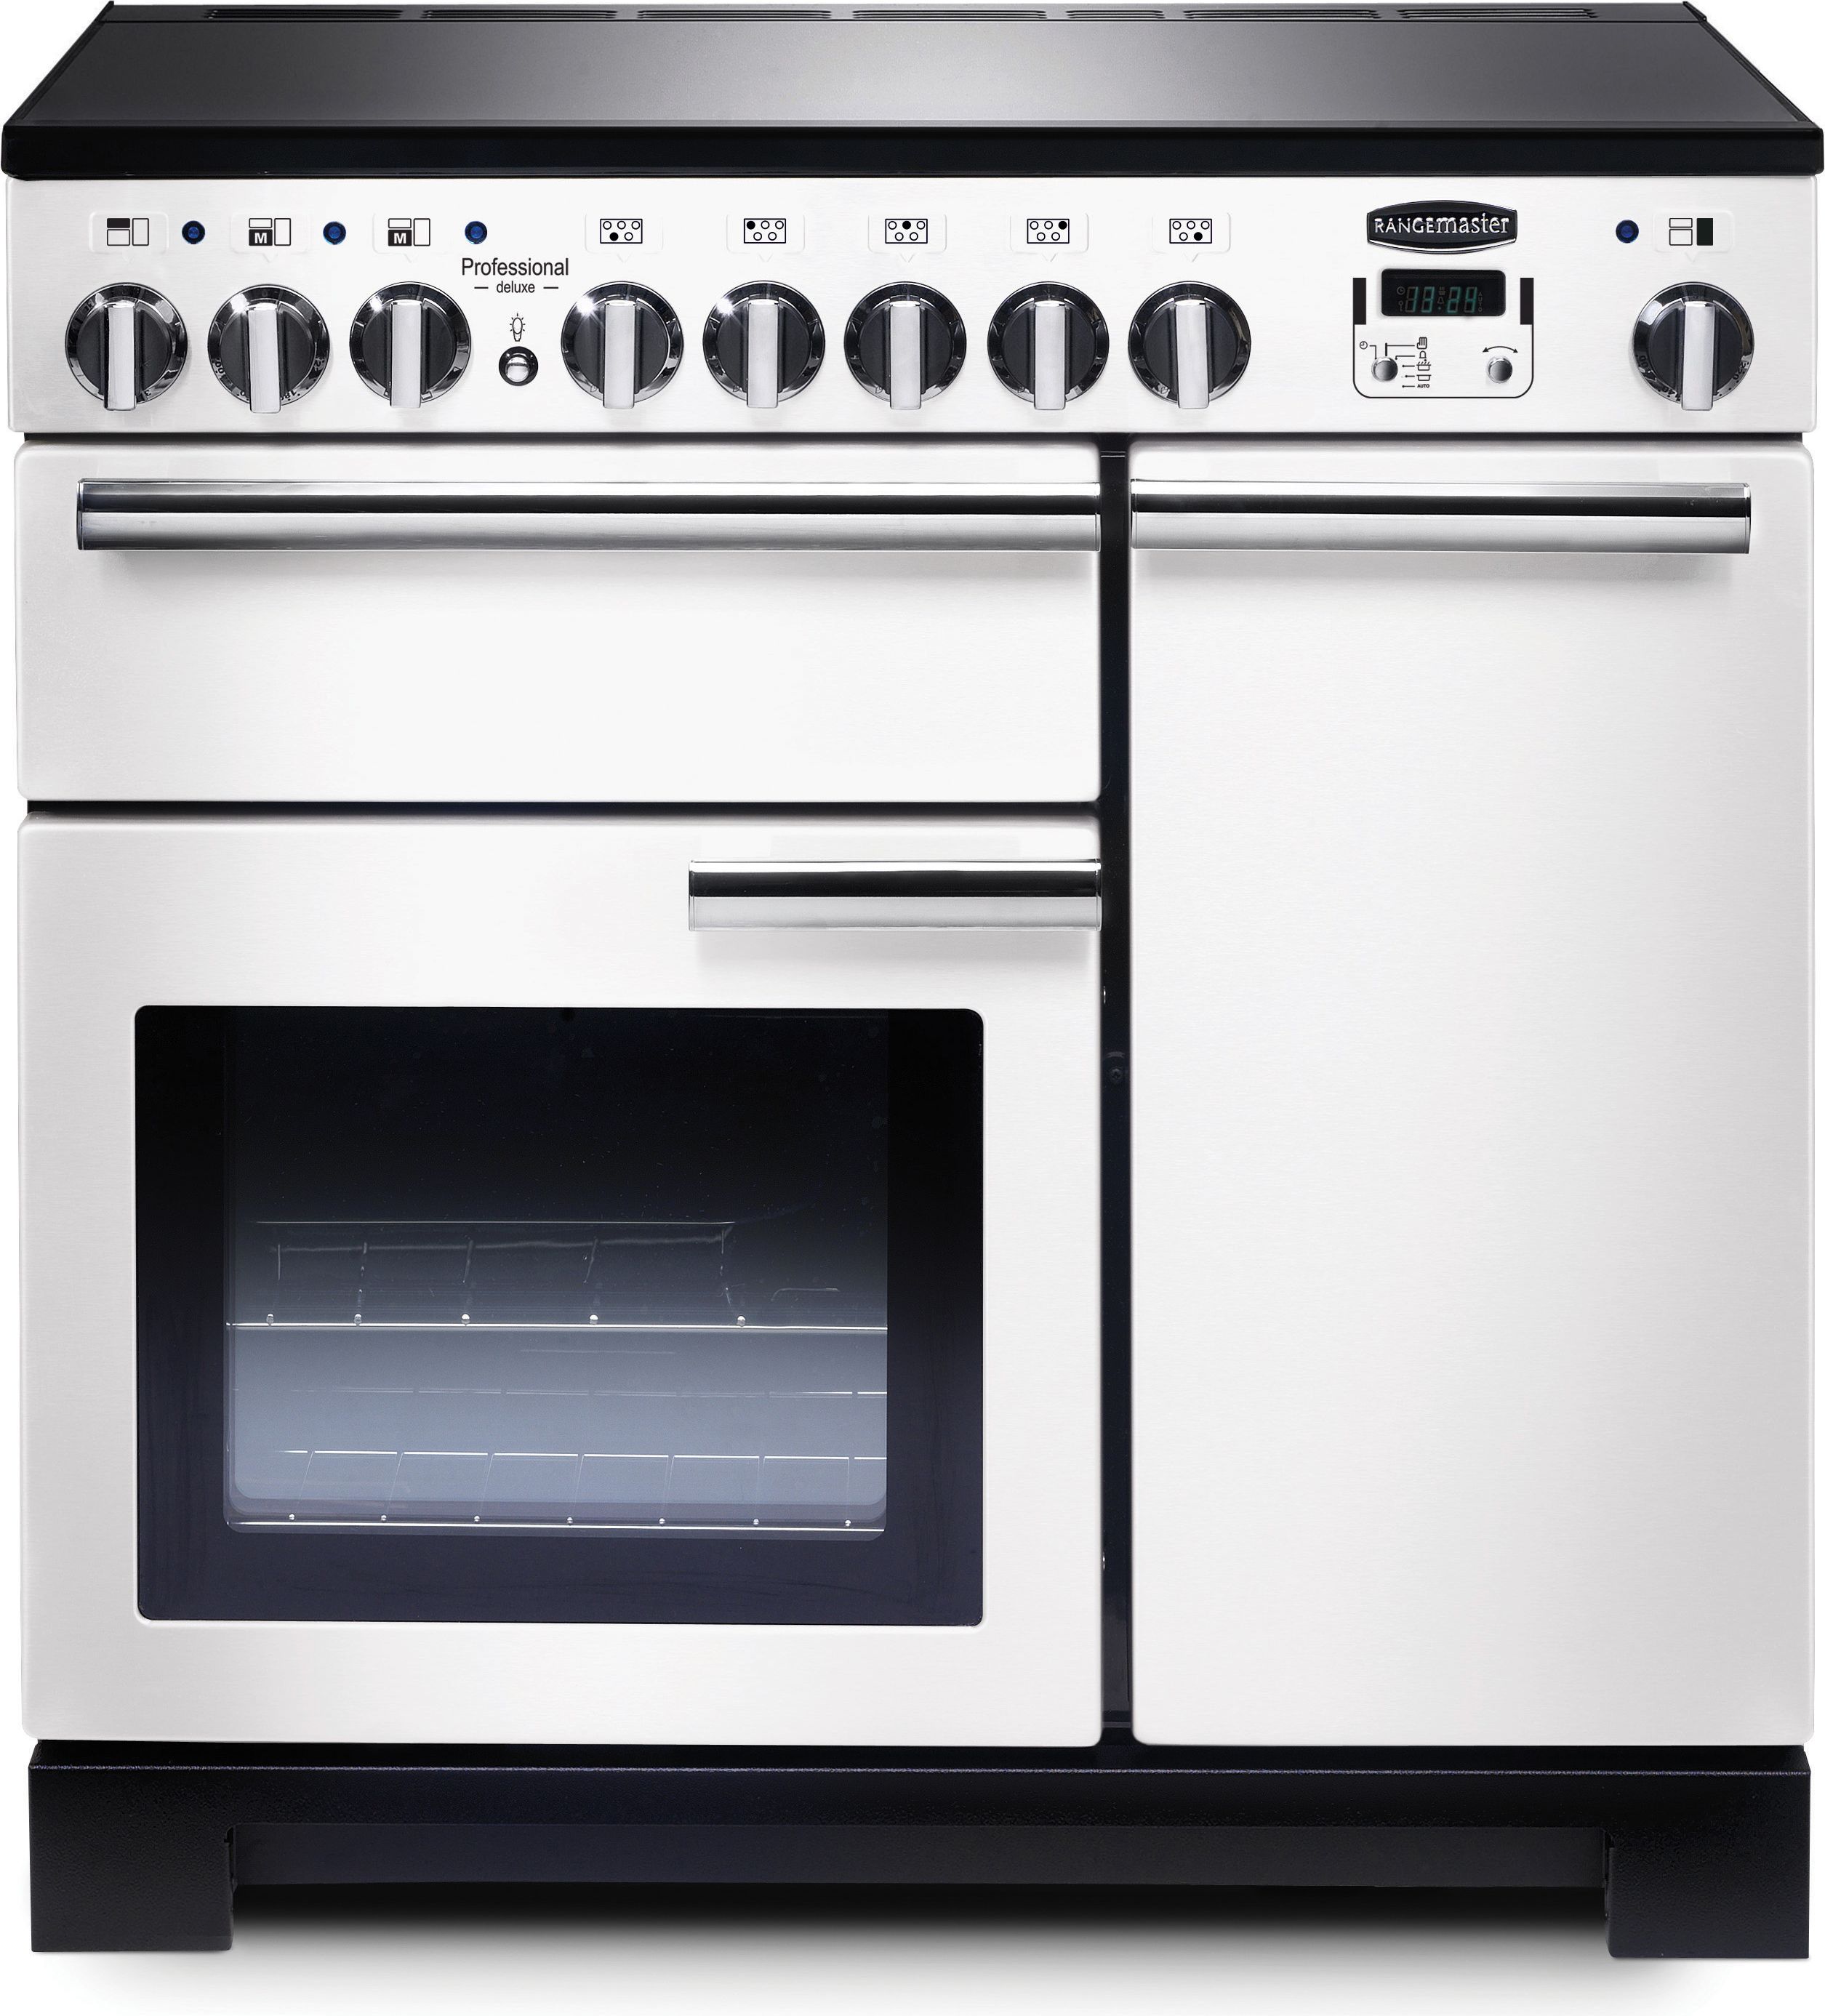 Rangemaster Professional Deluxe PDL90EIWH/C 90cm Electric Range Cooker with Induction Hob - White / Chrome - A/A Rated, White